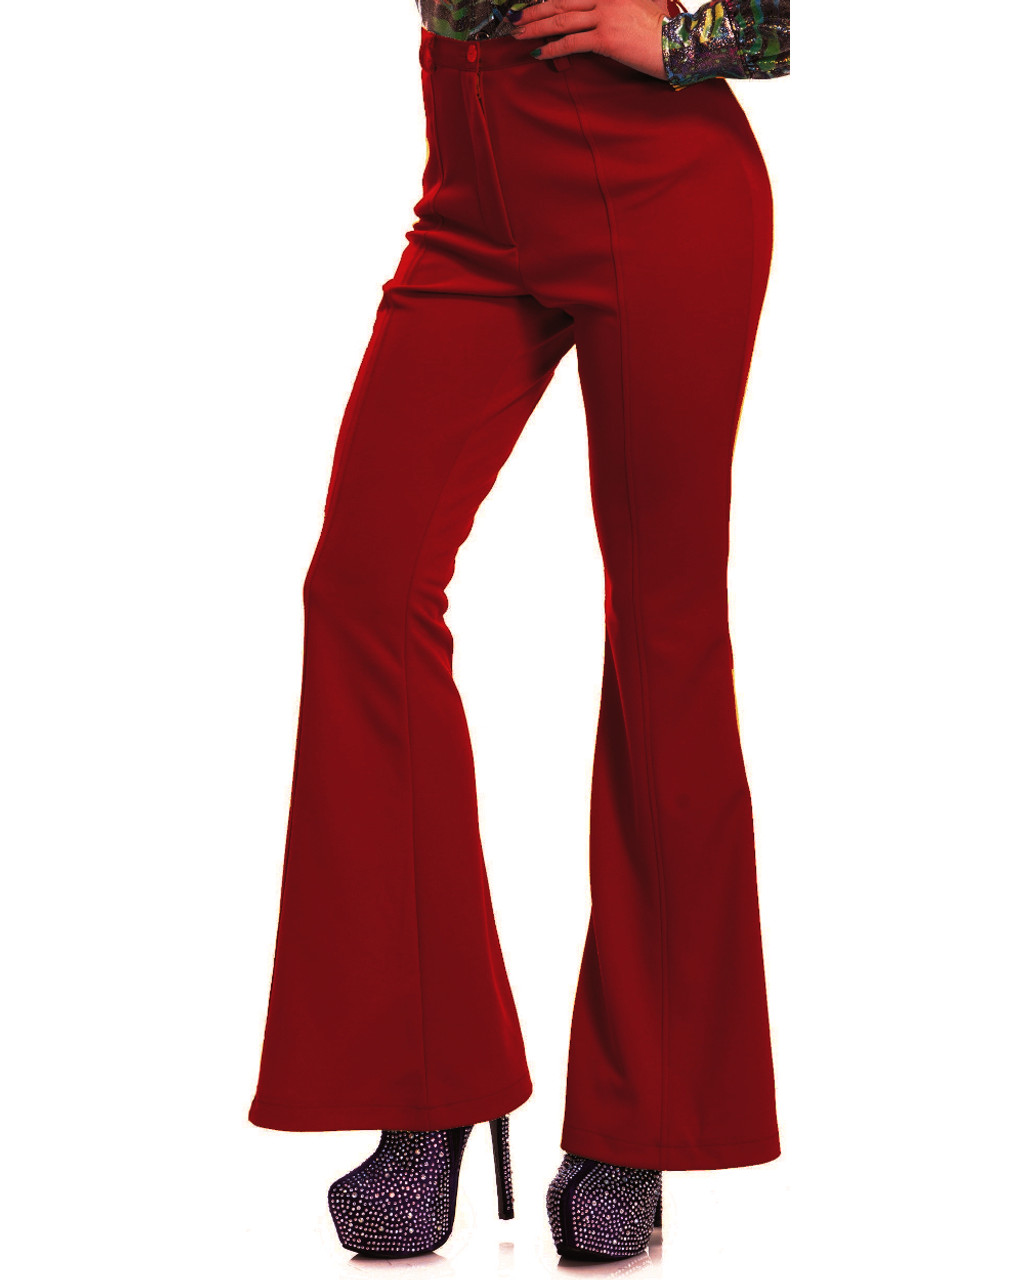 Womens 70s High Waisted Red Disco Pants